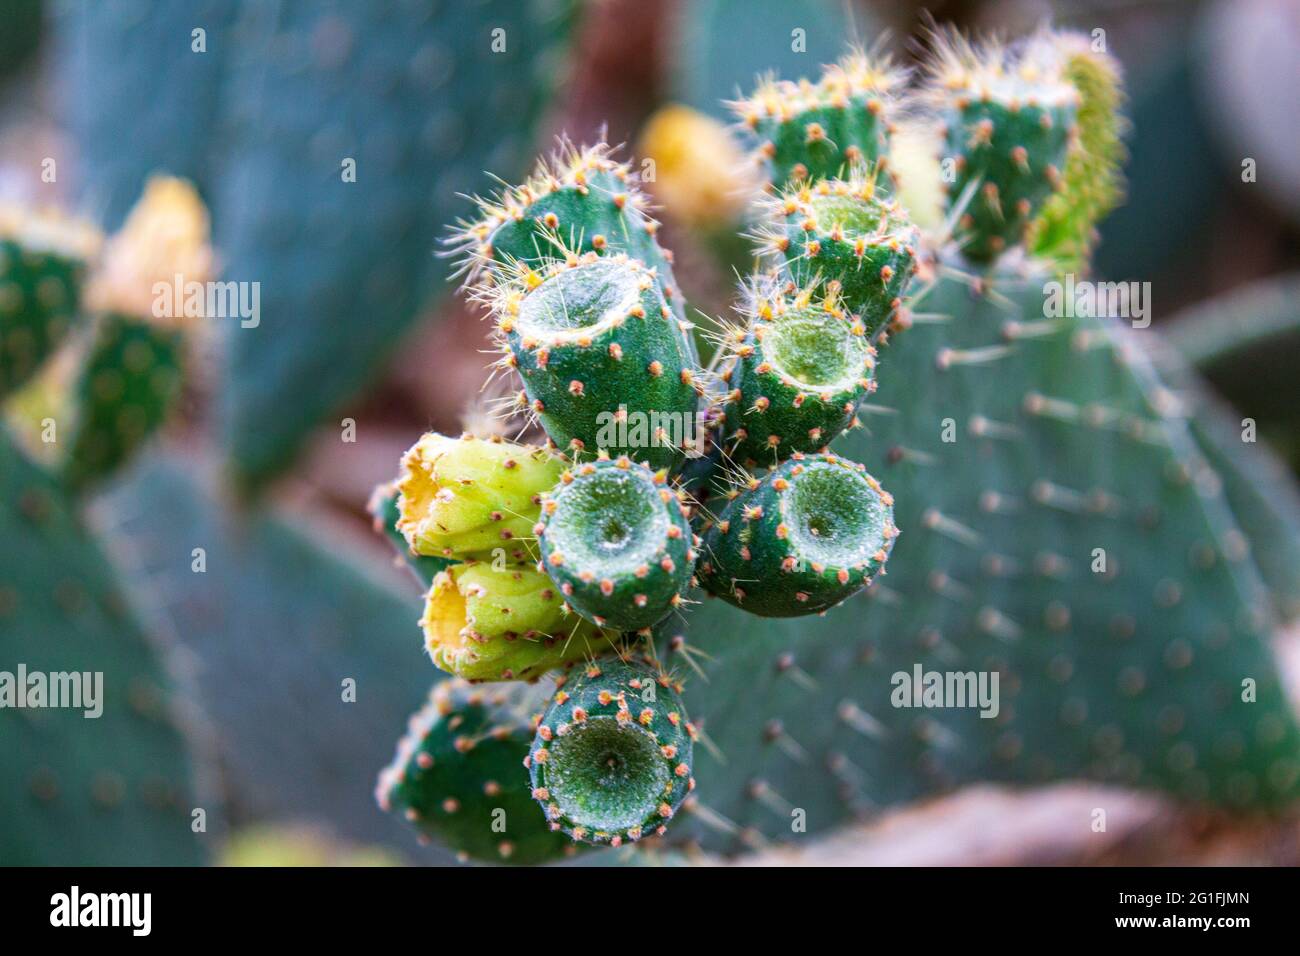 The flowers of the cactus are close-up. Close-up of cacti. Stock Photo